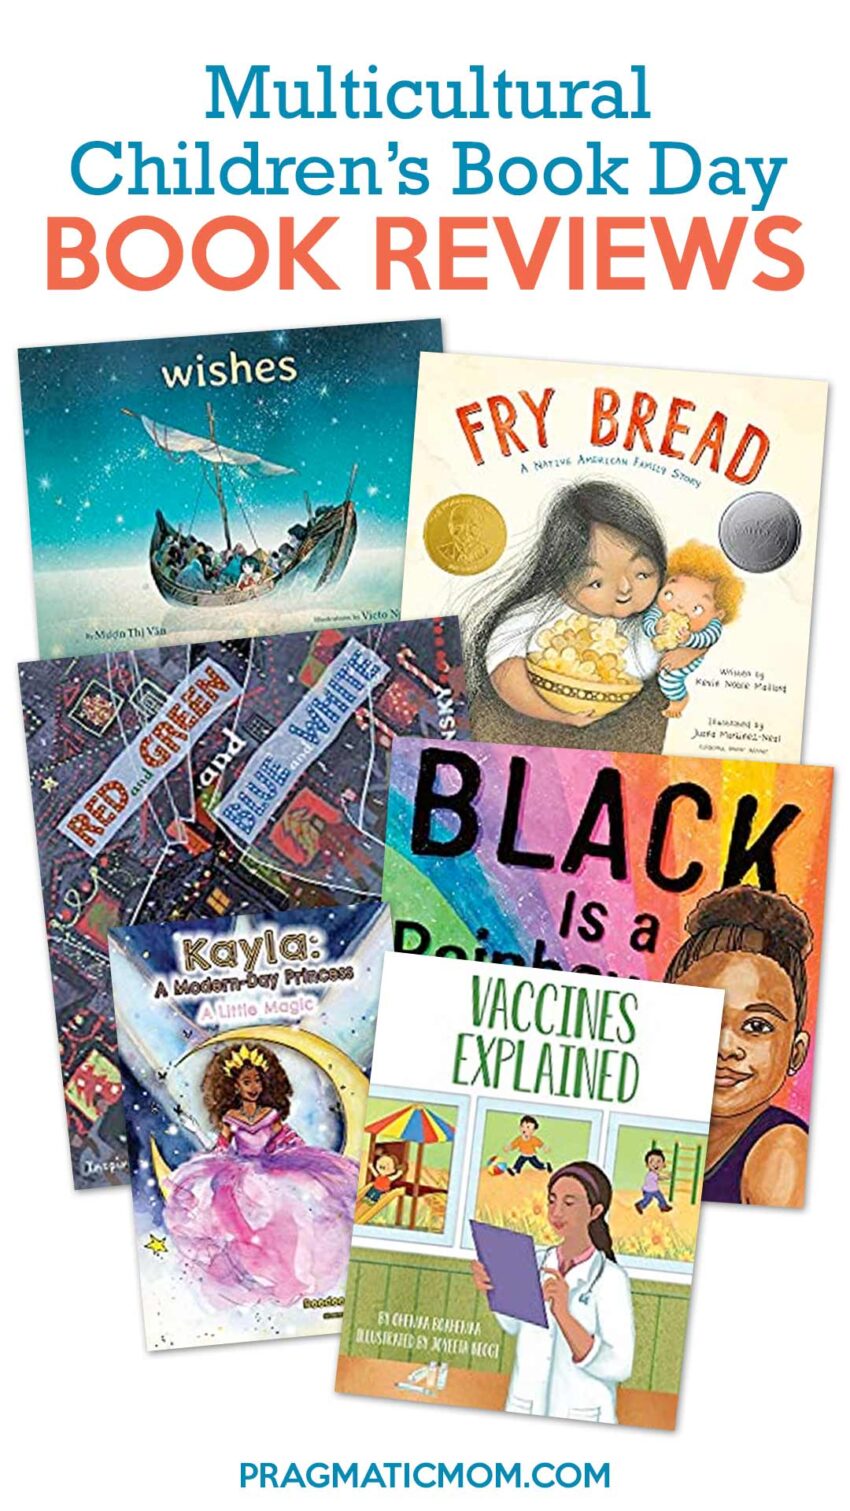 MY Multicultural Children's Book Day BOOK REVIEWS!